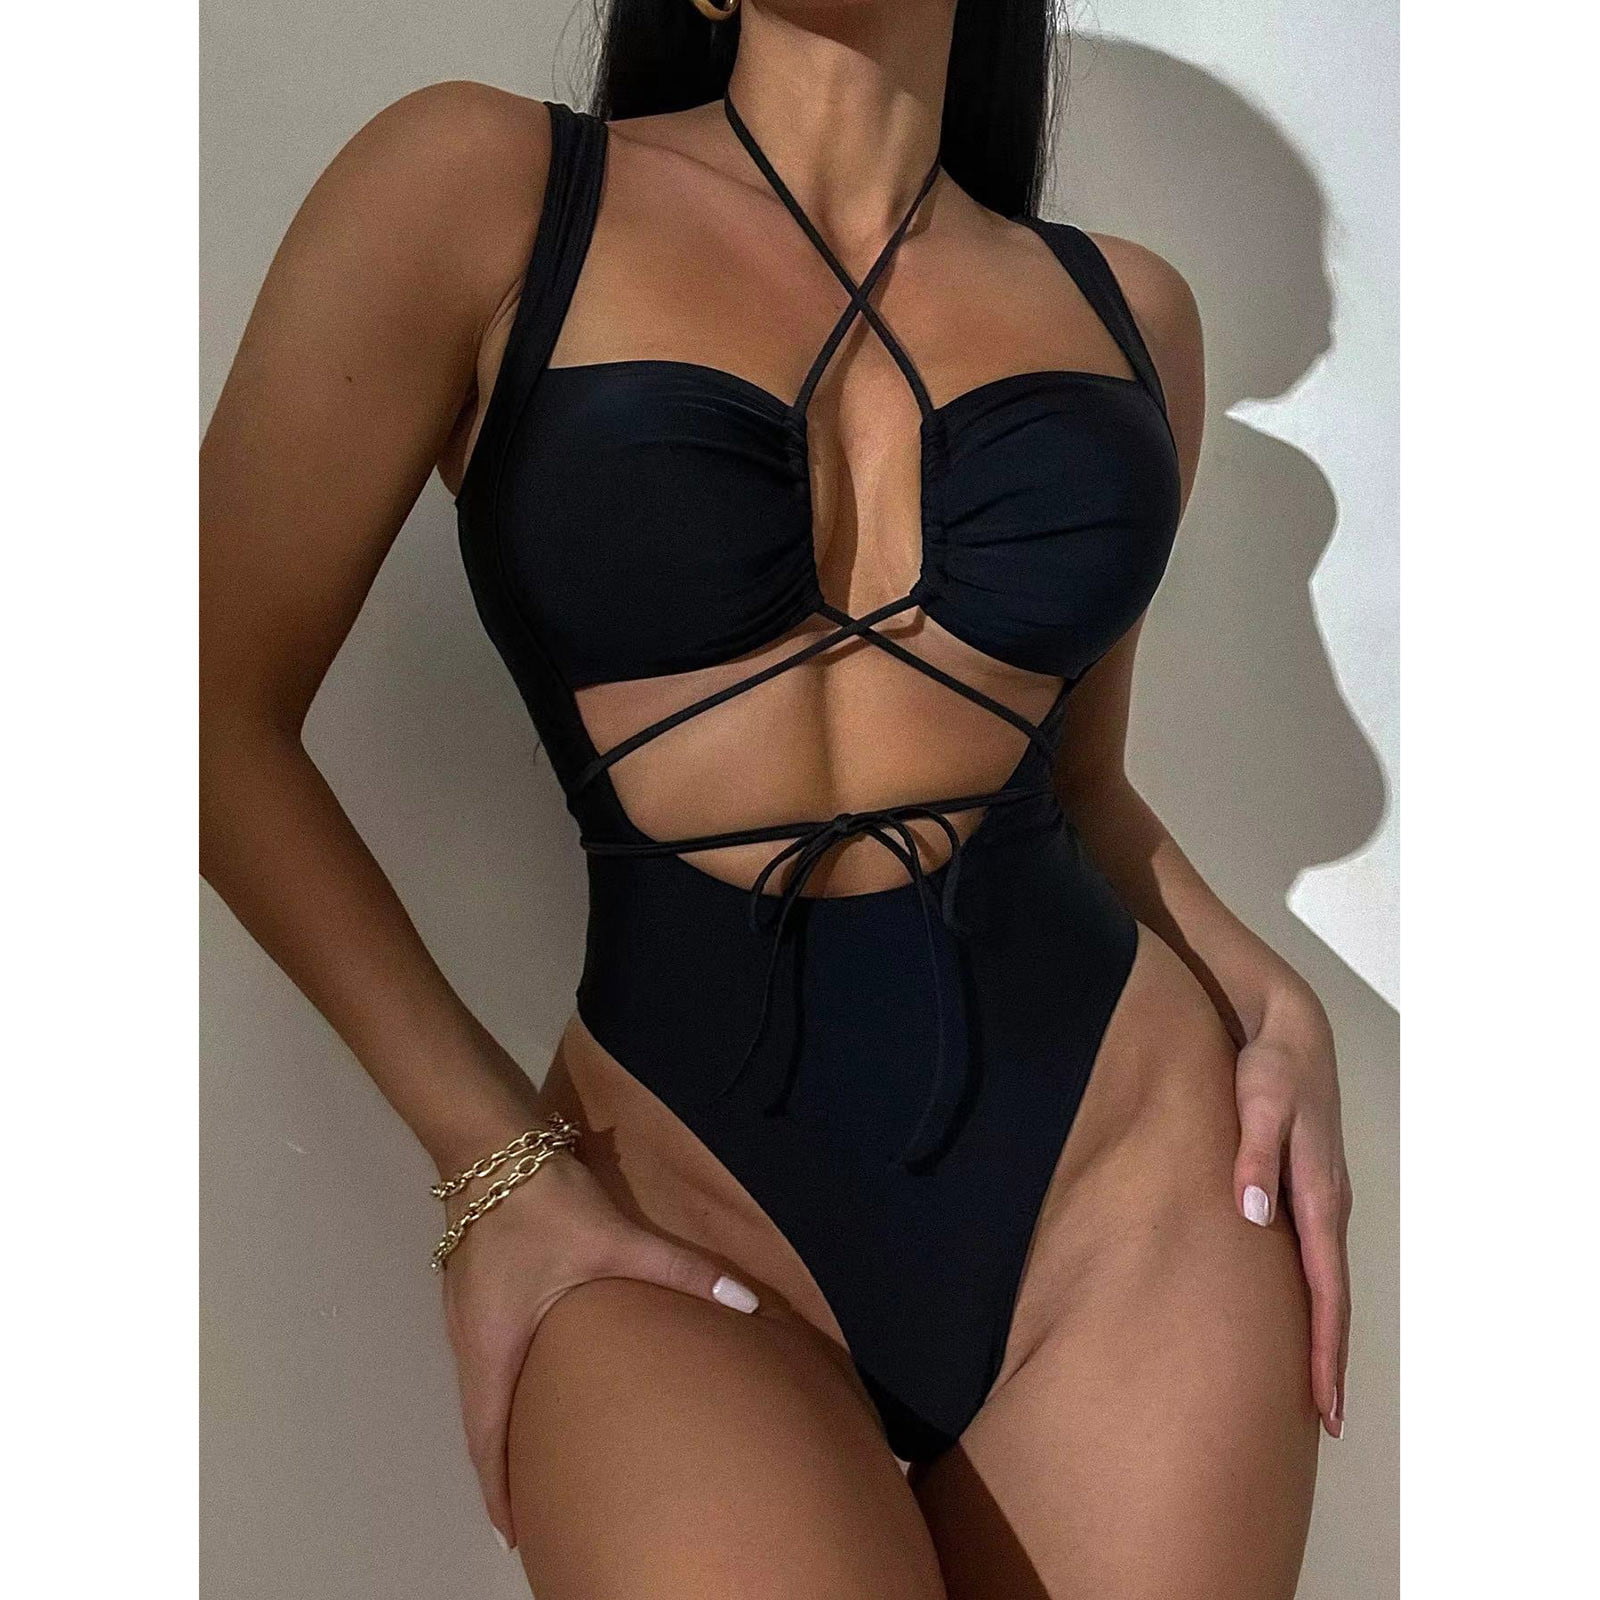 Herrnalise Women's Attractive One-piece Swimsuit Female Lace-up Hollowed  Out Backless Lace-up Bikini Bikinis for Women